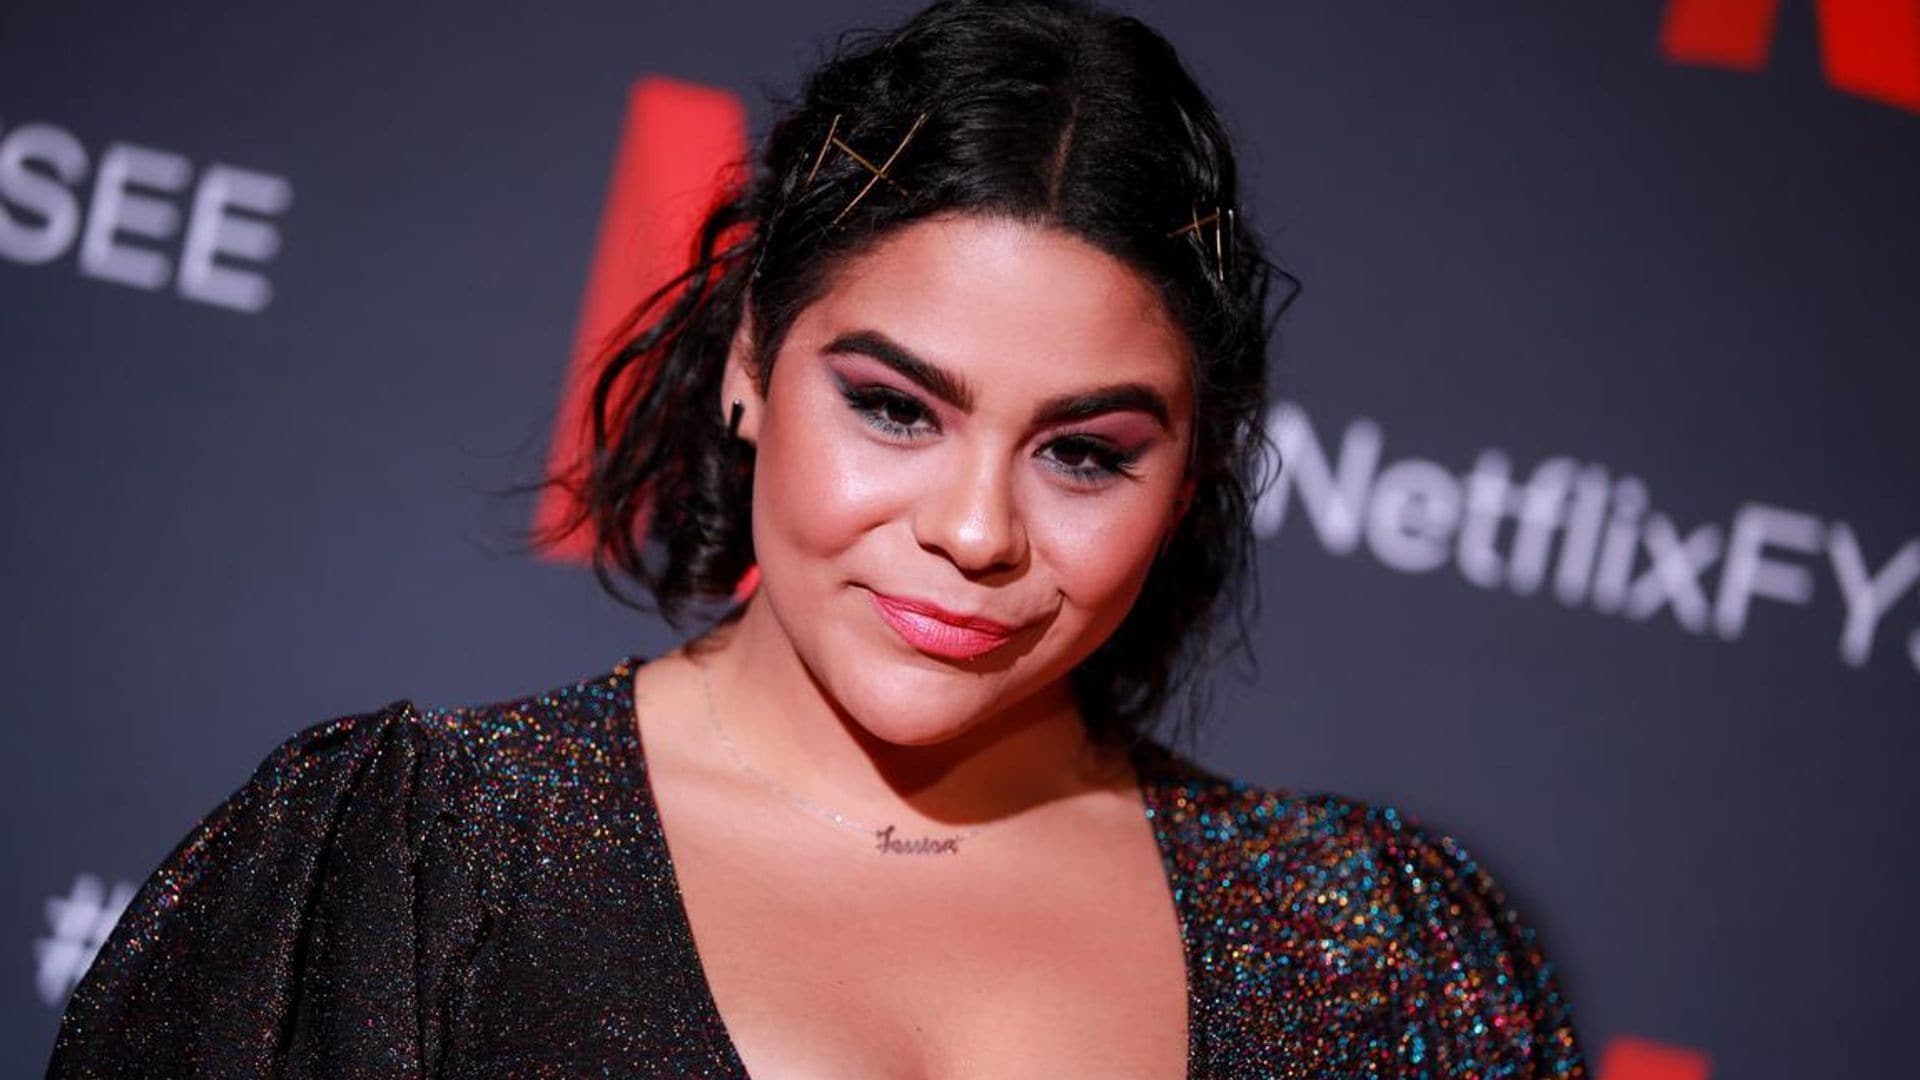 ‘On My Block’ star Jessica Marie Garcia gets real about tapping into her inner strength as a Latina